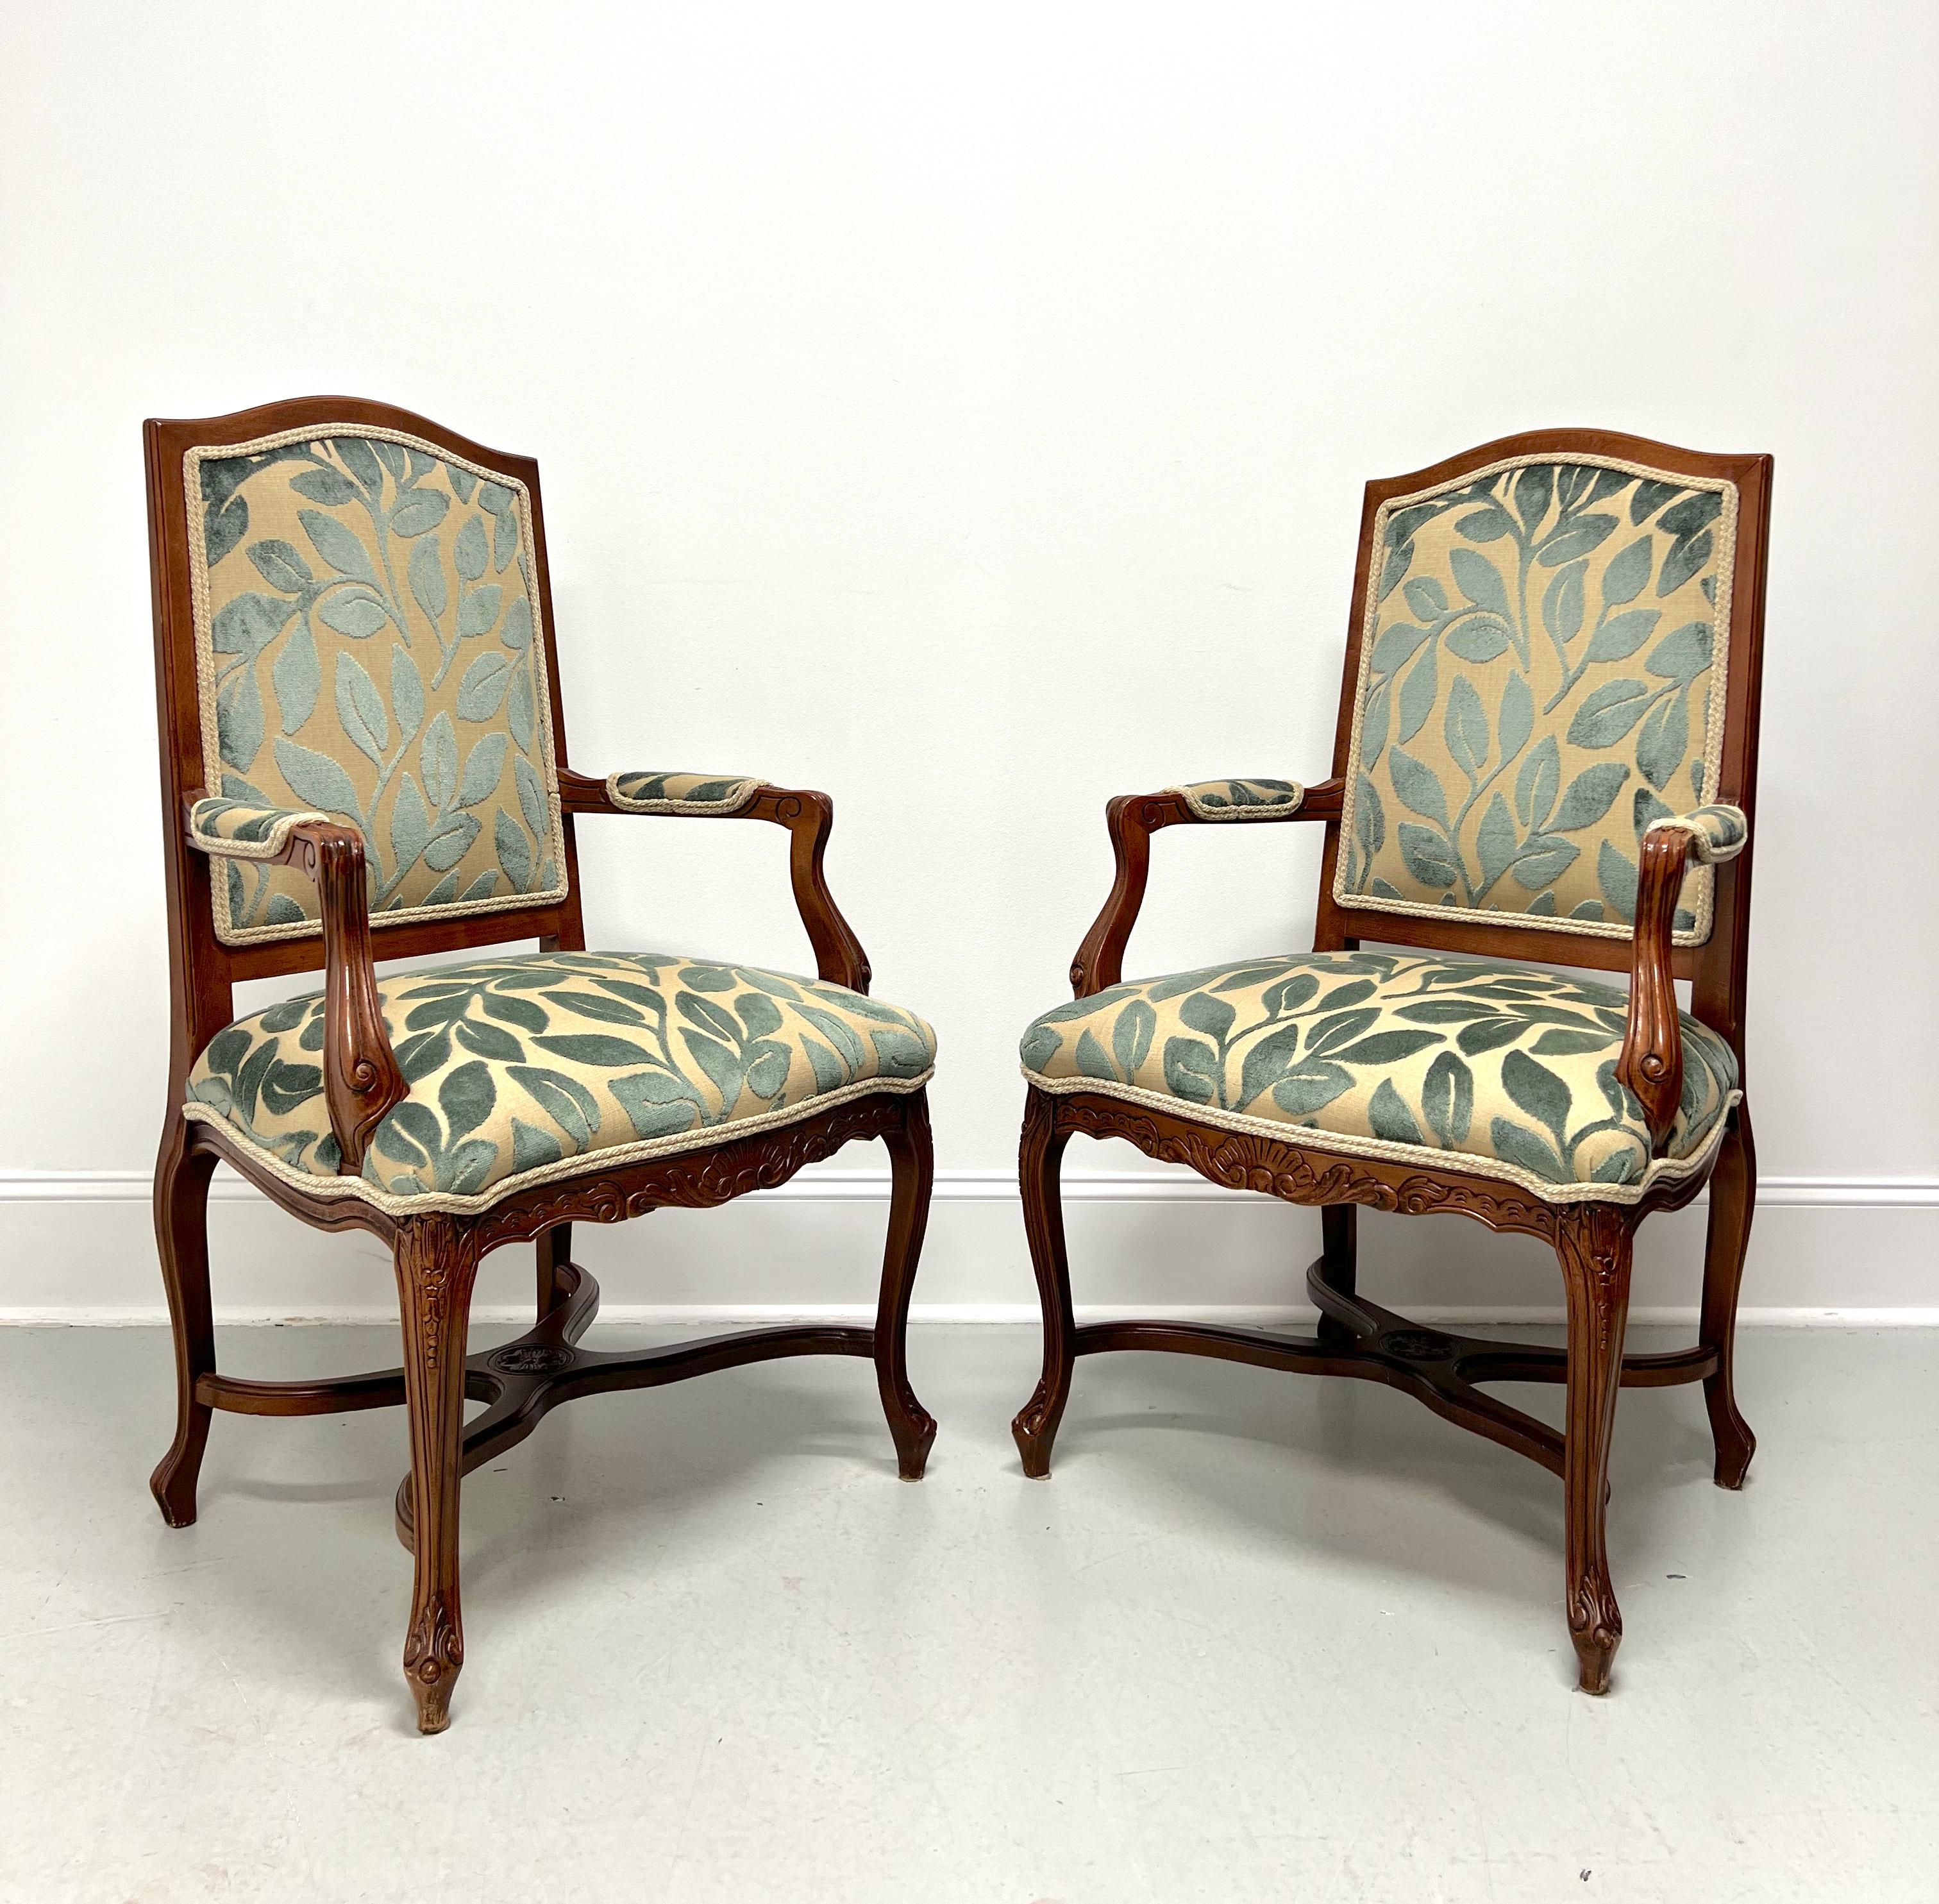 20th Century French Country Louis XV Walnut Fauteuils Open-Arm Armchairs - Pair For Sale 1